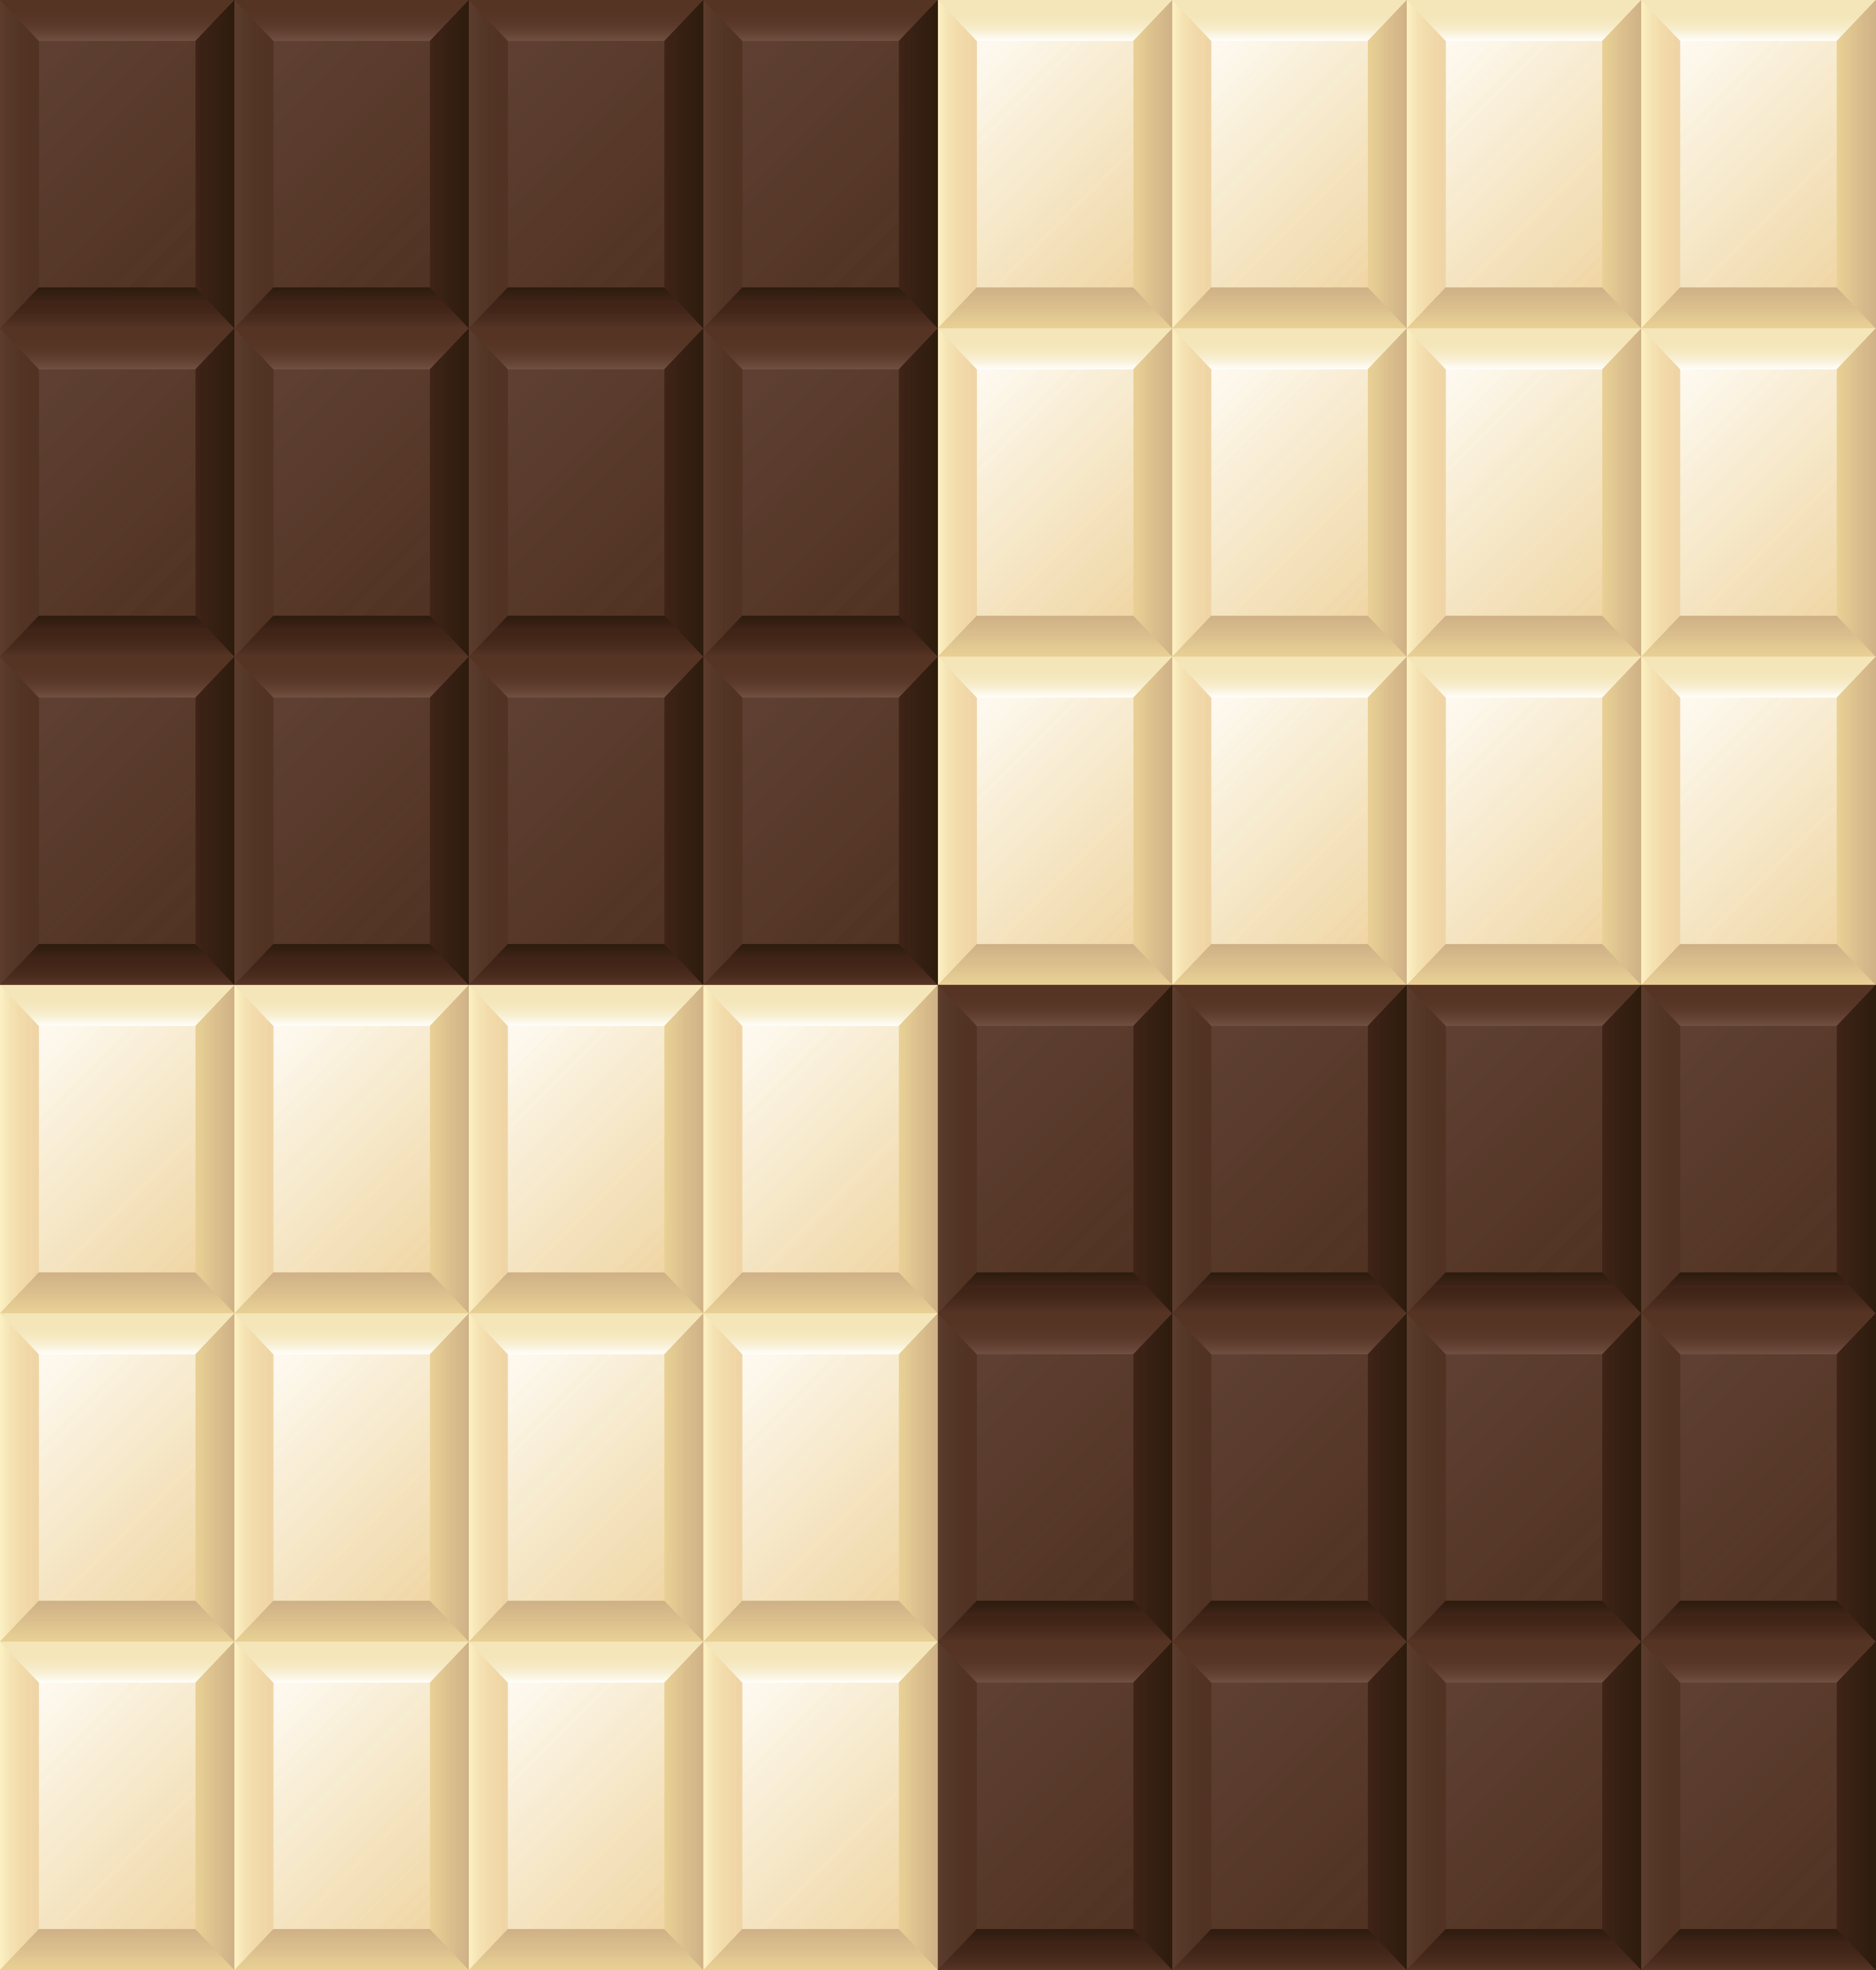 White and Dark Chocolate Bars Background​-Quality Image and Transparent PNG Free Clipart